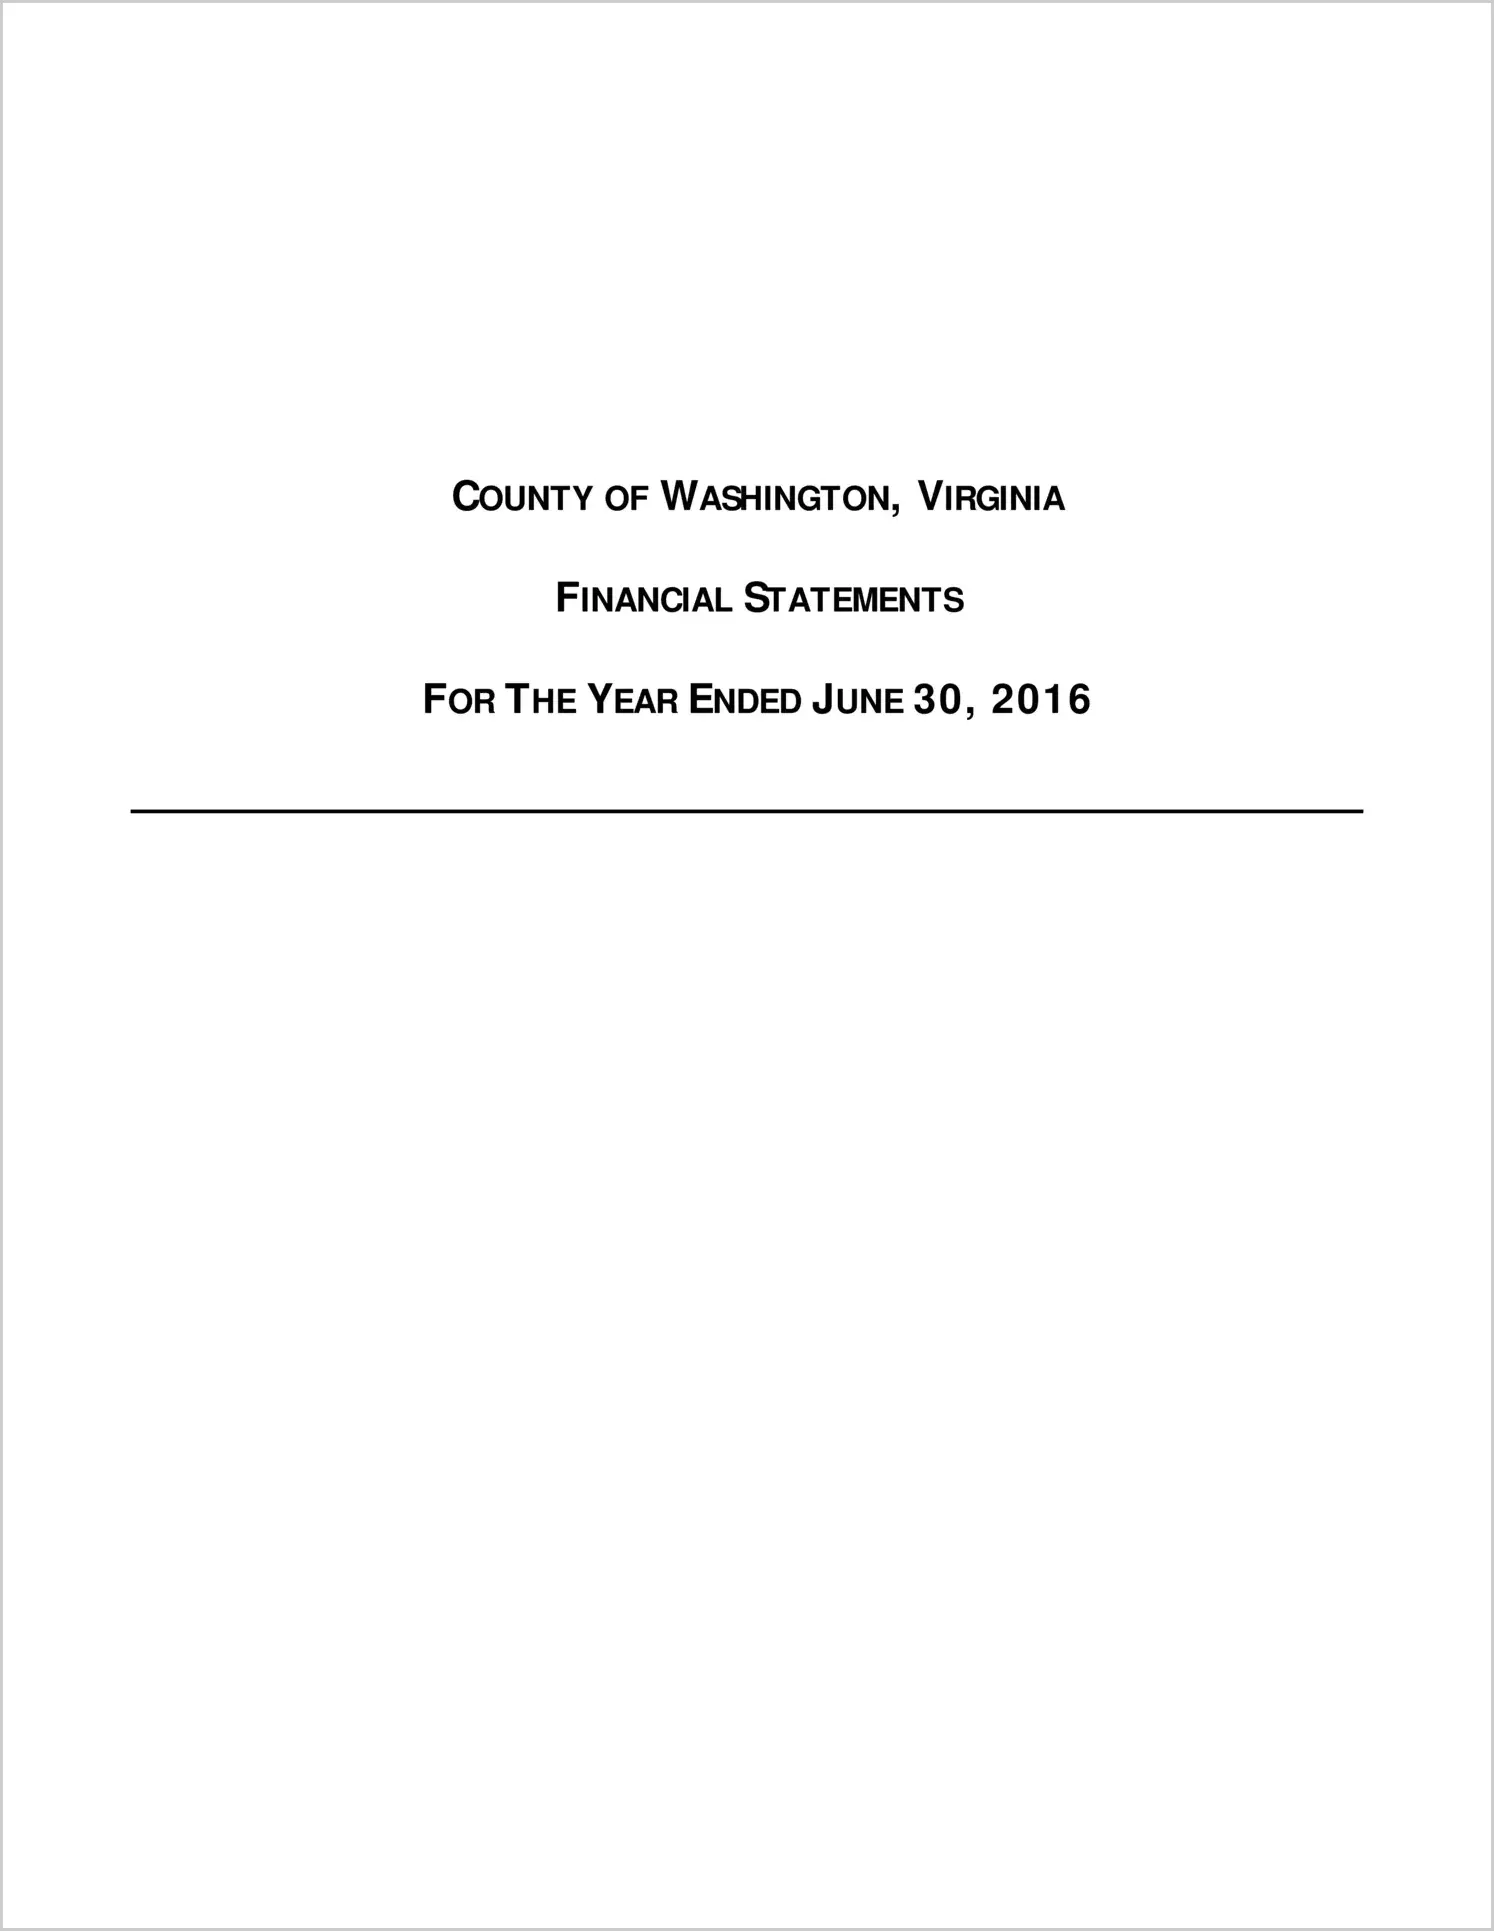 2016 Annual Financial Report for County of Washington